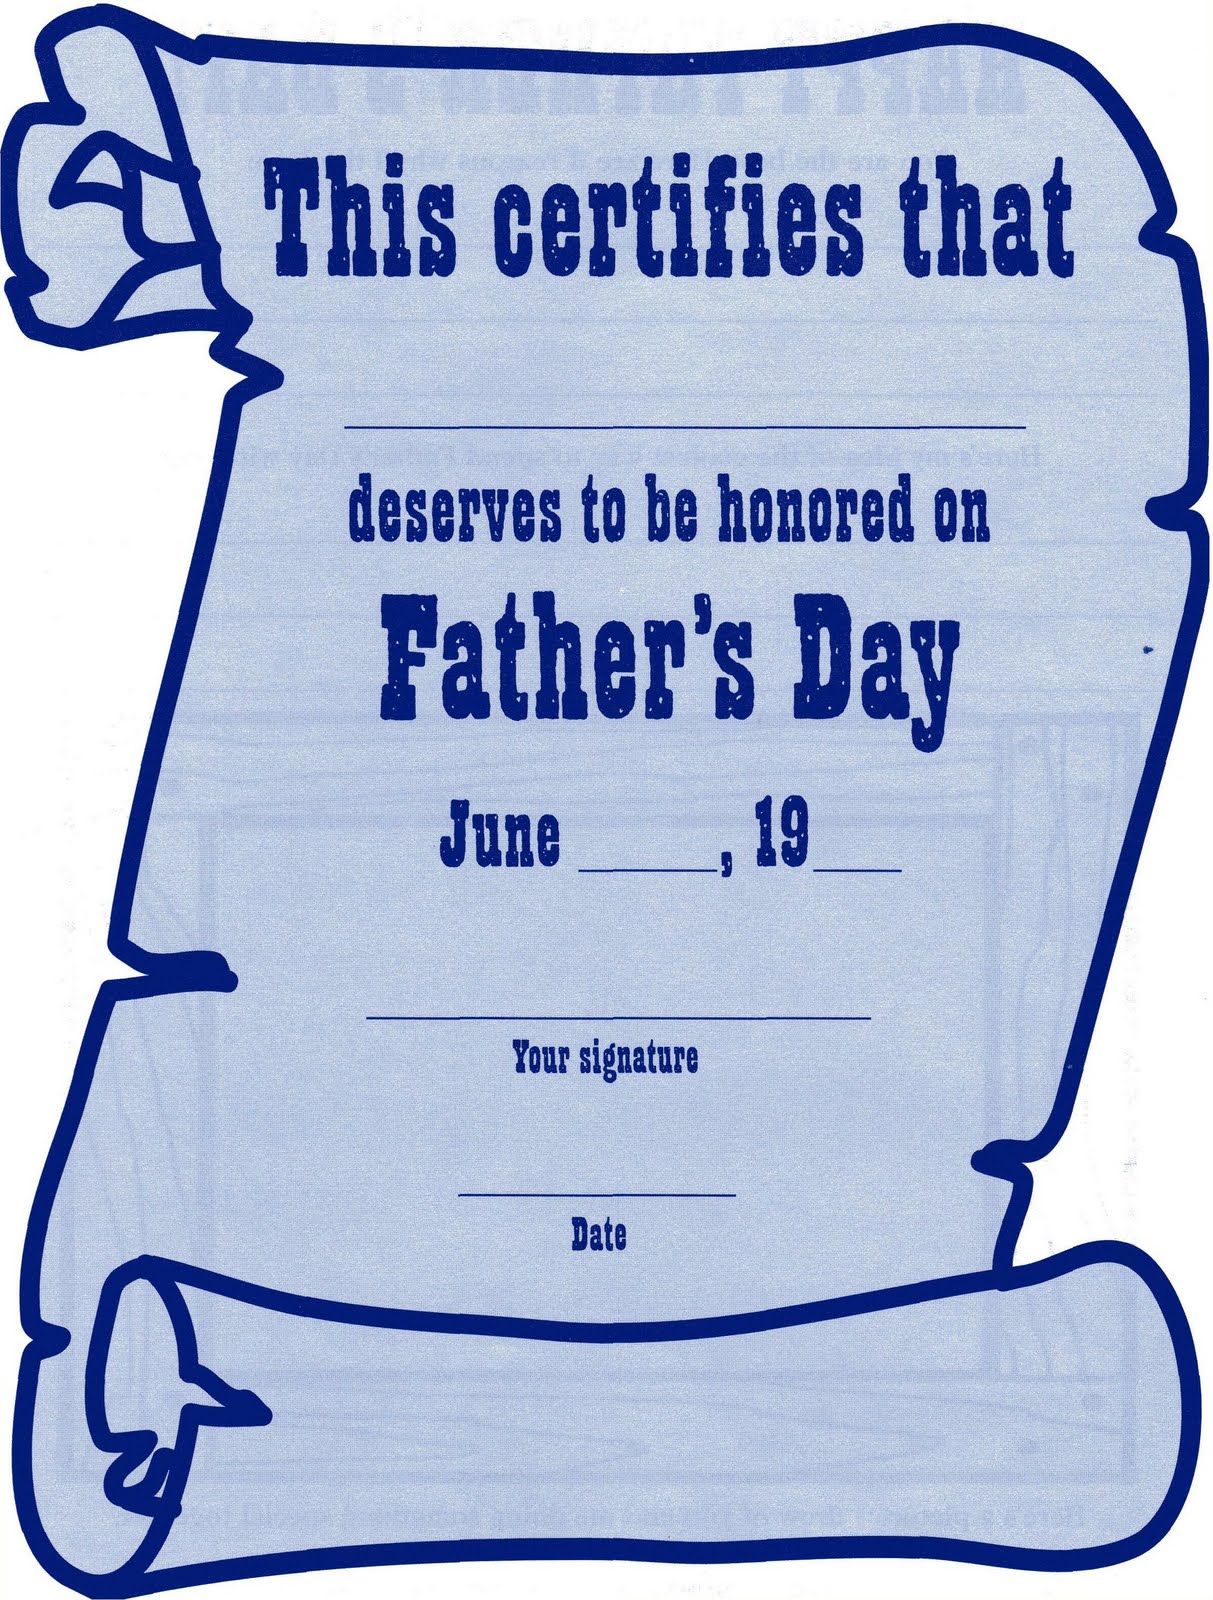 ELEMENTARY SCHOOL ENRICHMENT ACTIVITIES: FATHER'S DAY CERTIFICATE